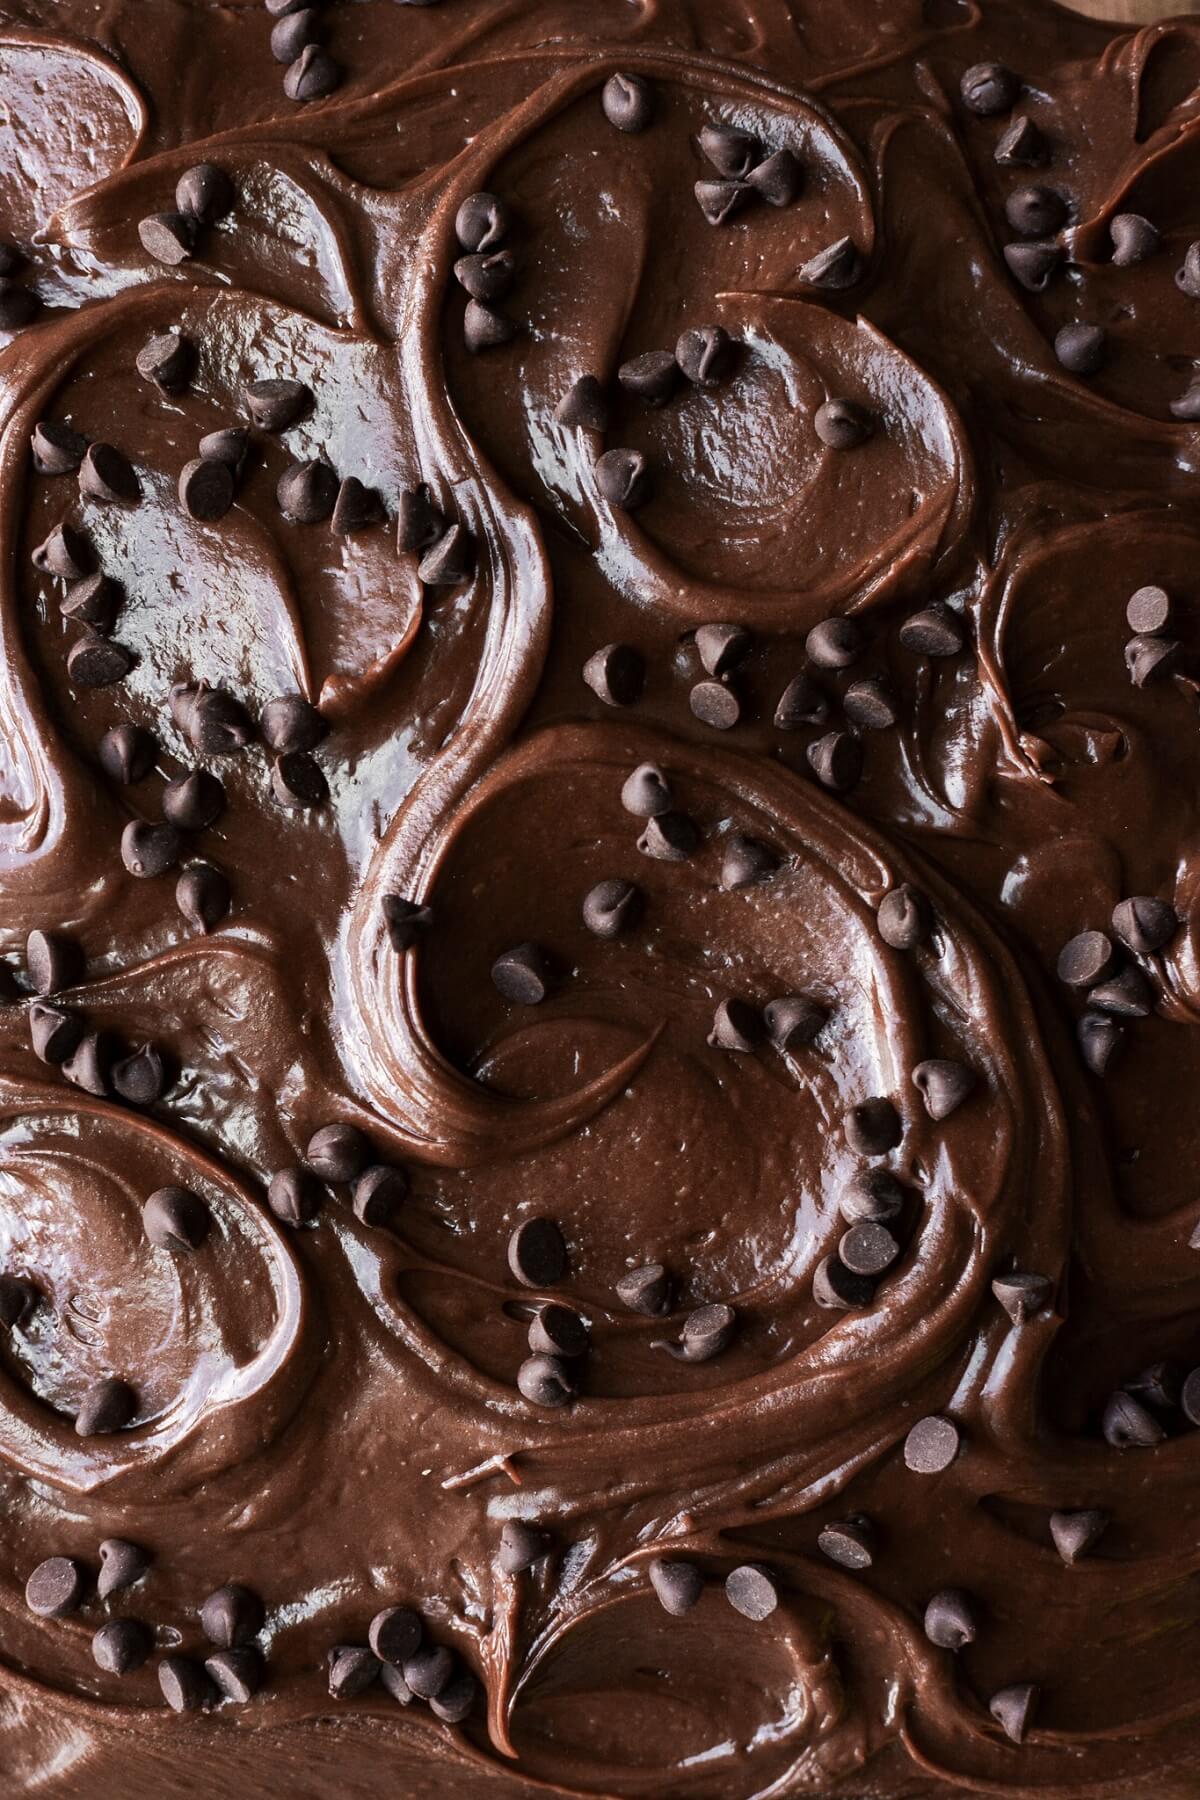 Swirls of chocolate fudge frosting with chocolate chips.